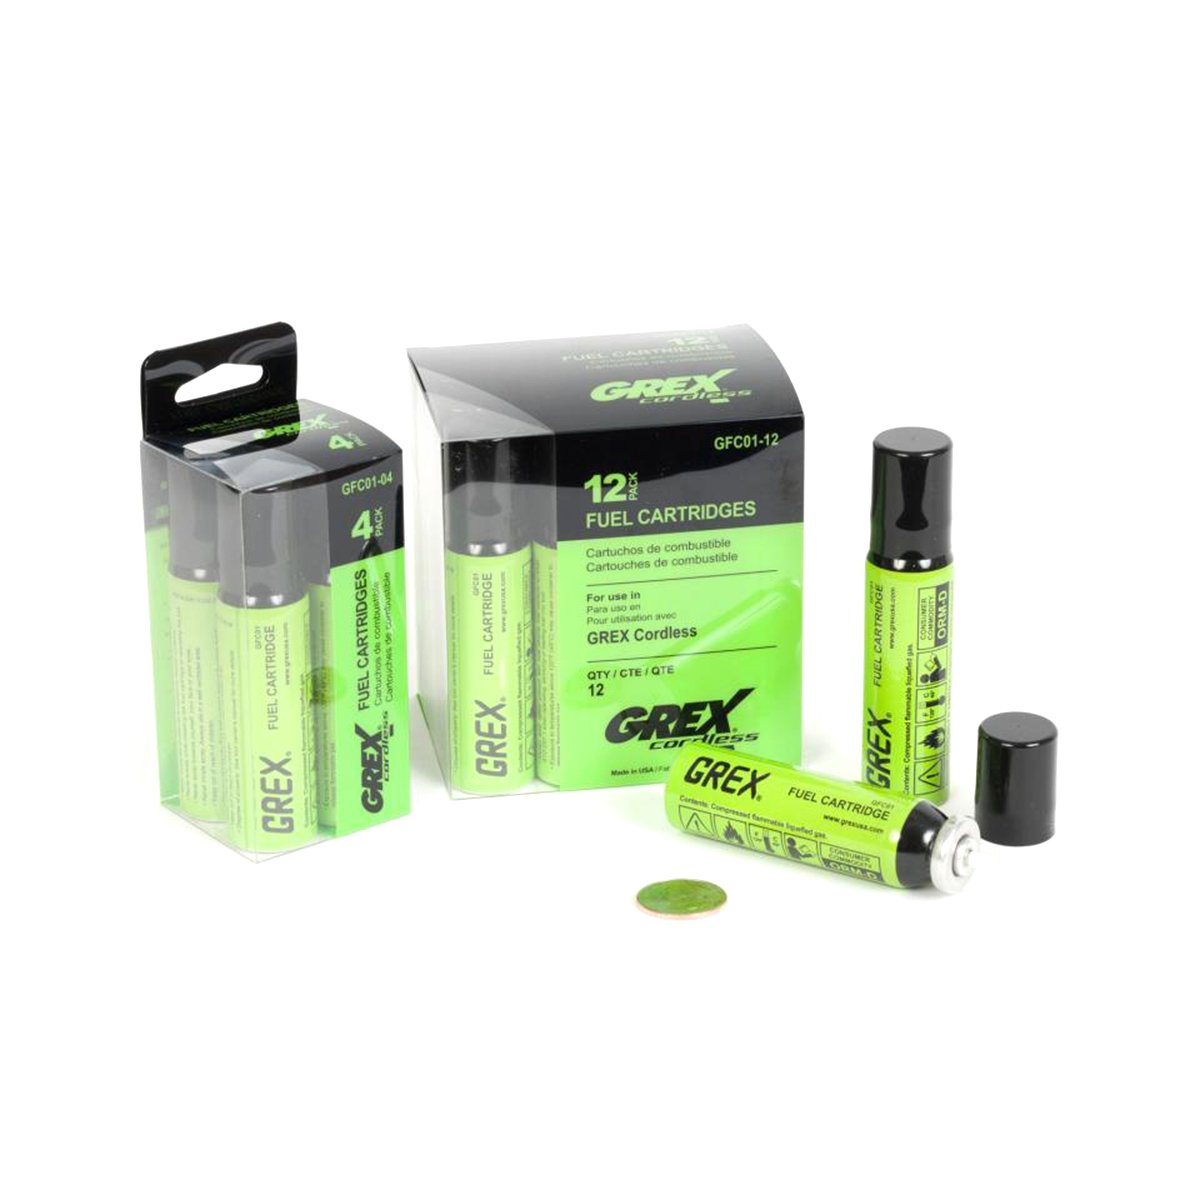 4-pack and 12-pack of Grex Fuel Cartridges for Grex cordless nailers and pinners with coin for scale.